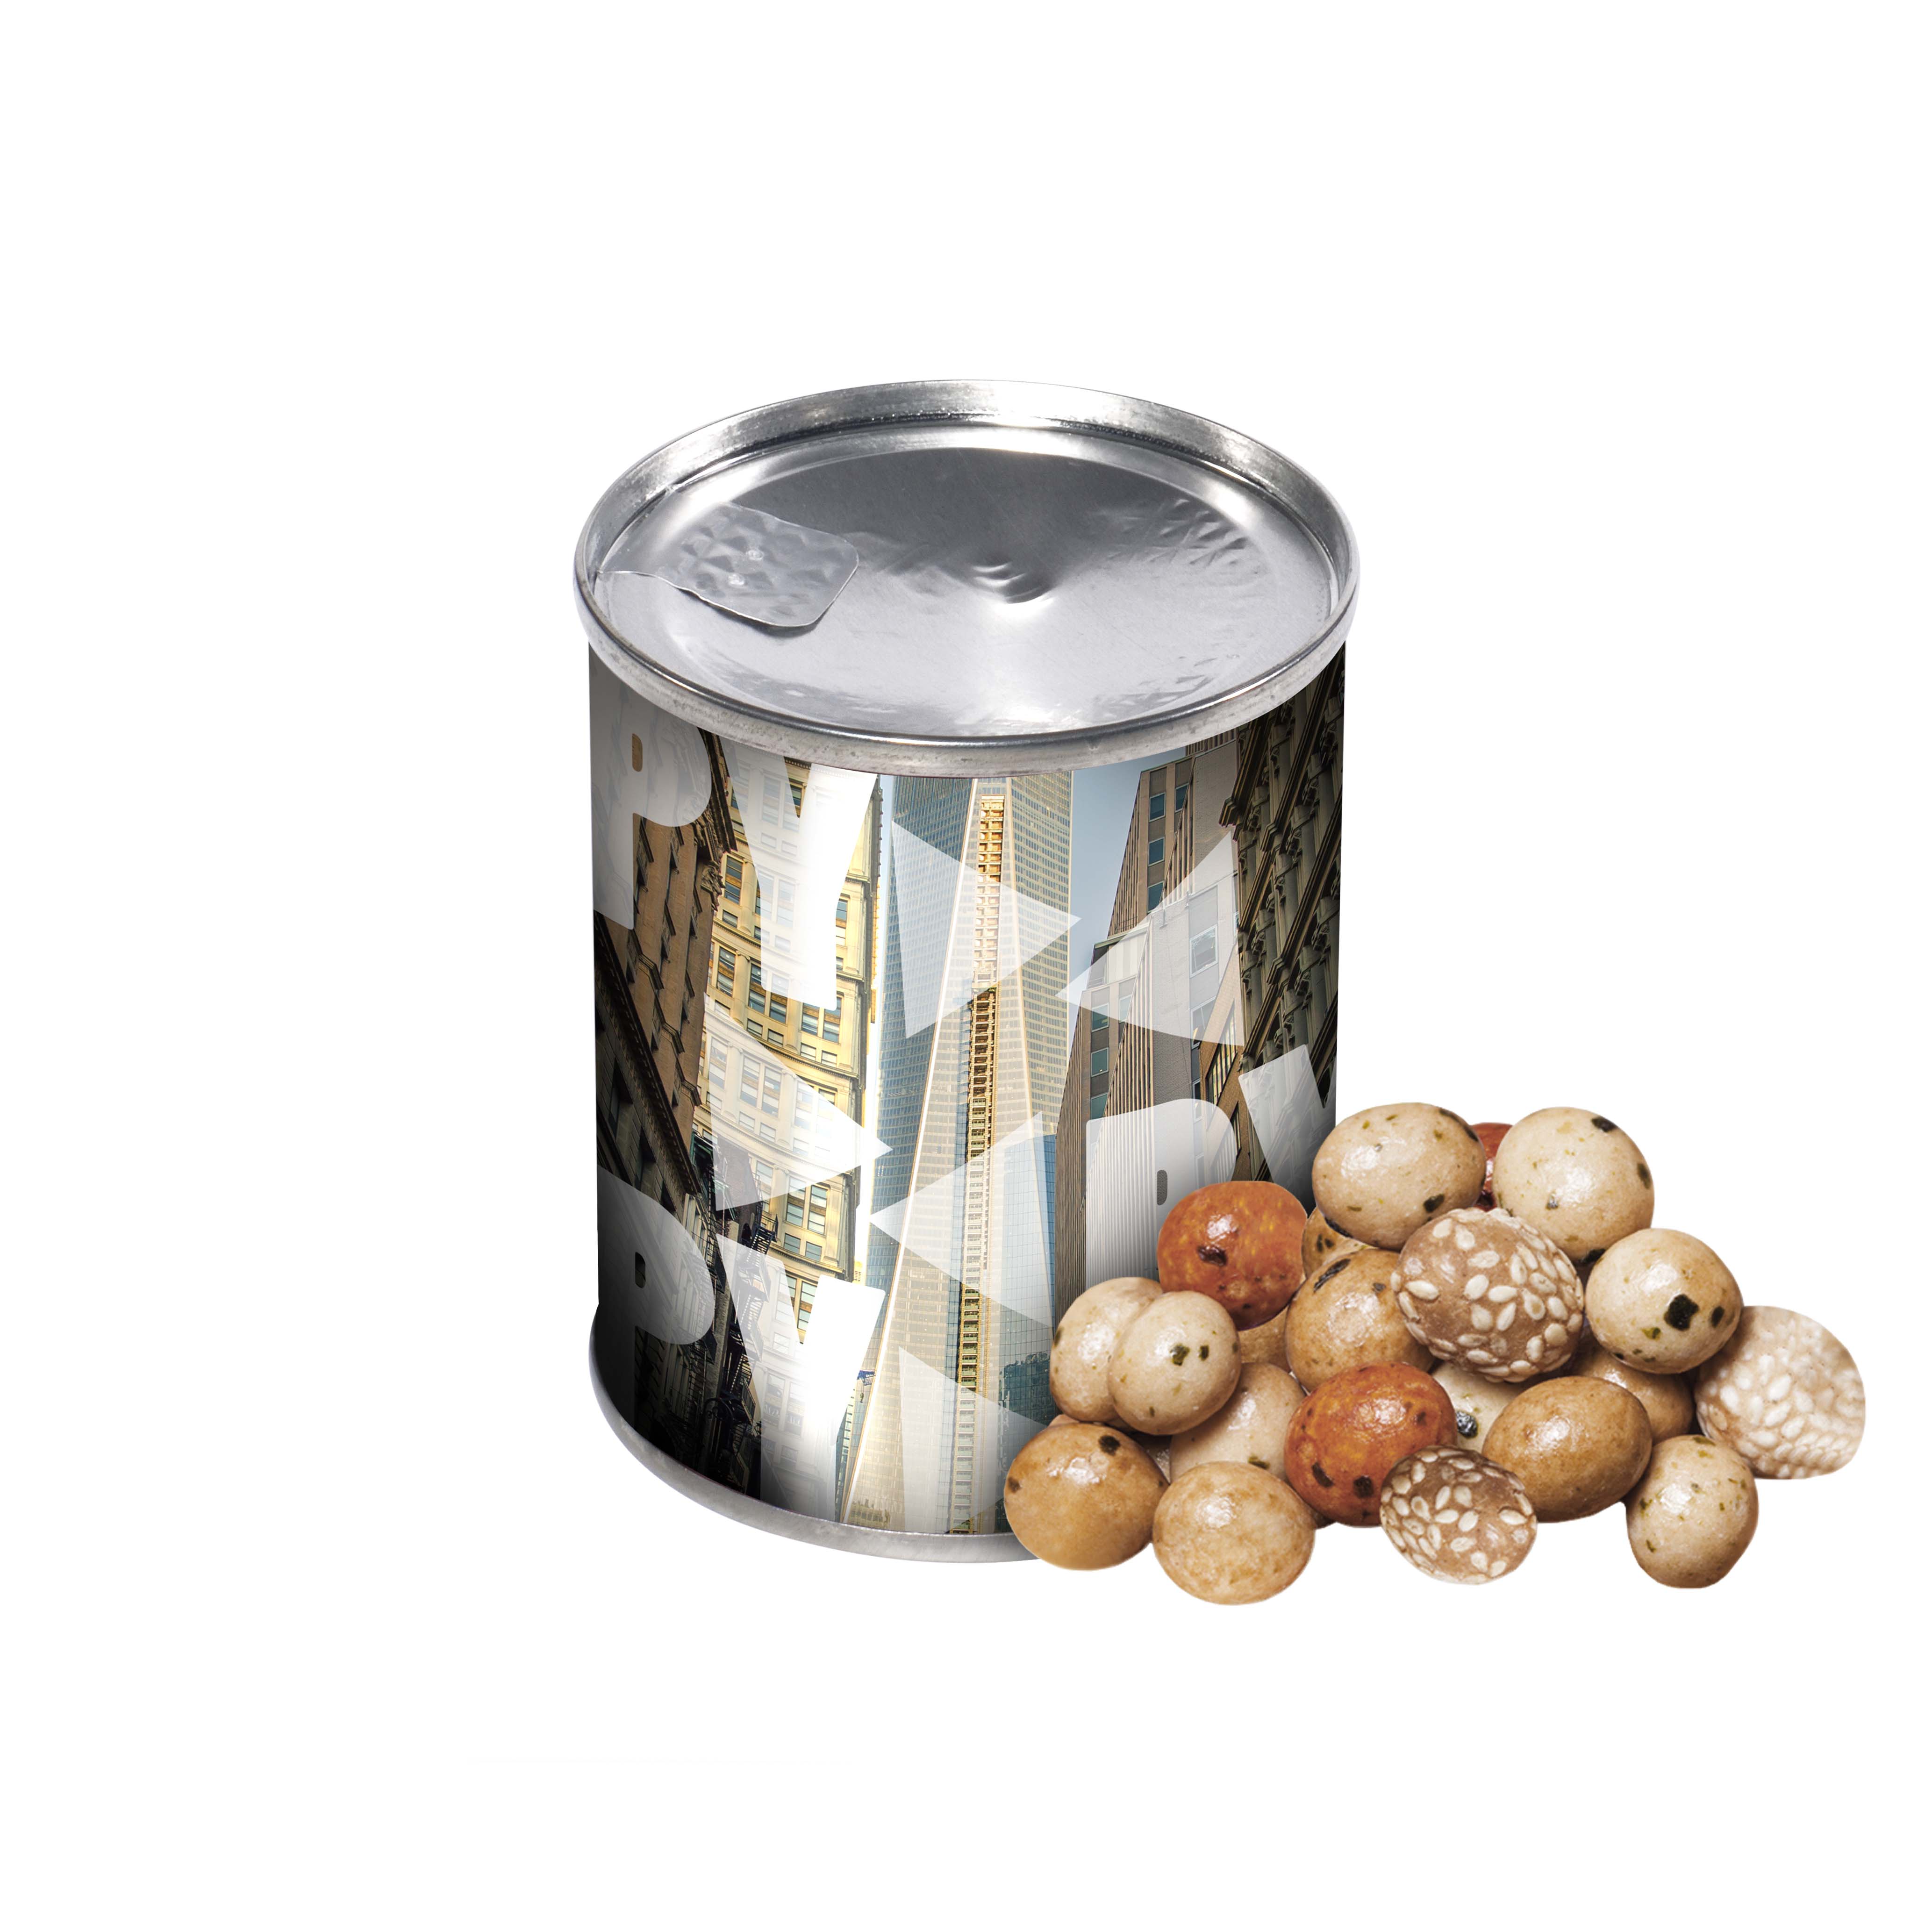 A silver jar with a full color print containing a mixture of oriental items - Greenwich